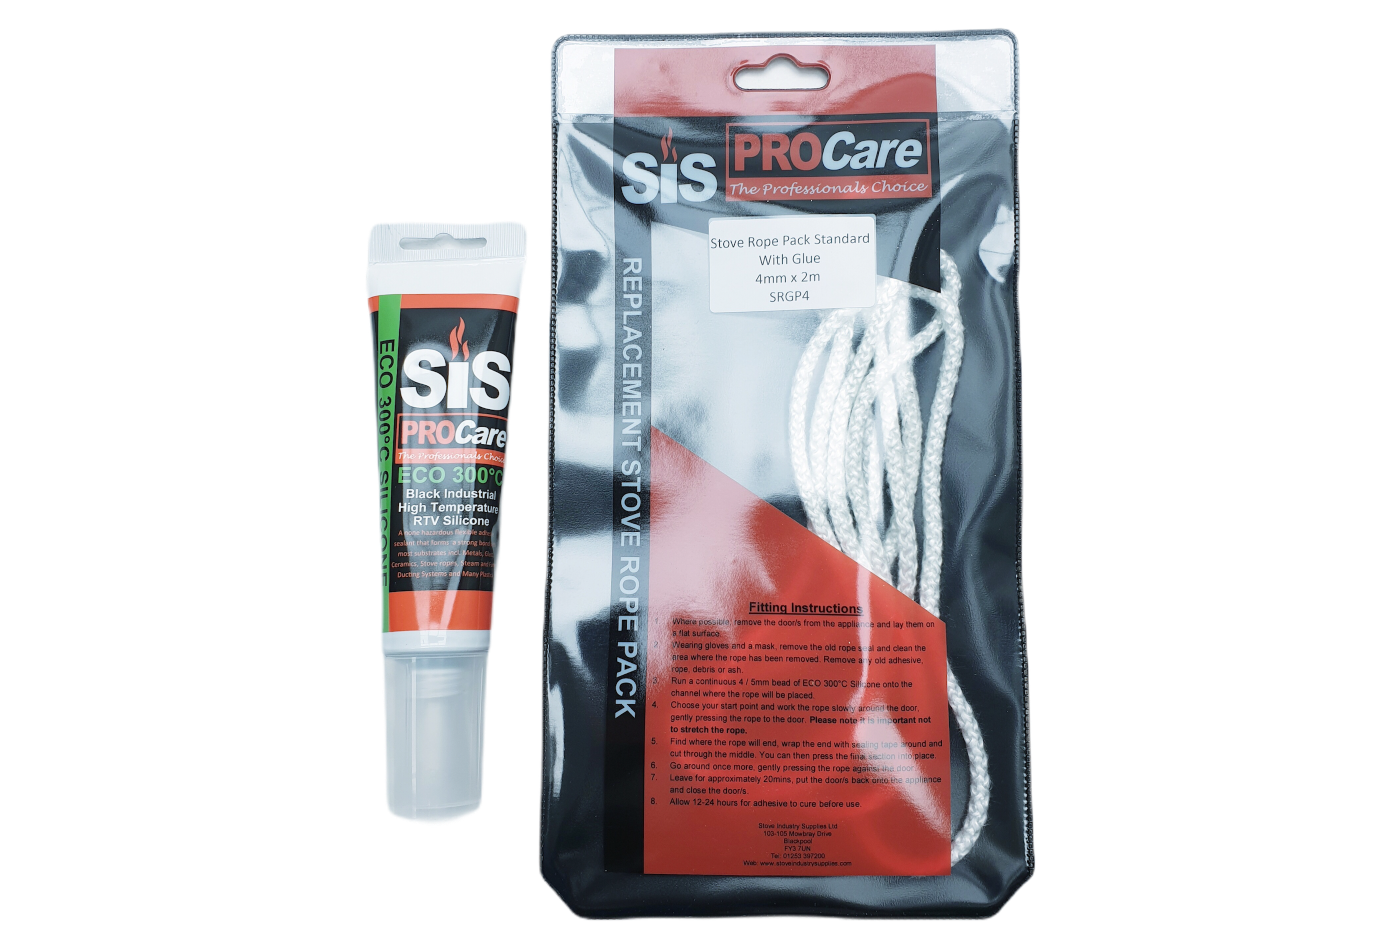 SiS Procare White 4 milimetre x 2 metre Standard Stove Rope & 80 millilitre Rope Glue Pack - product code SRGP4